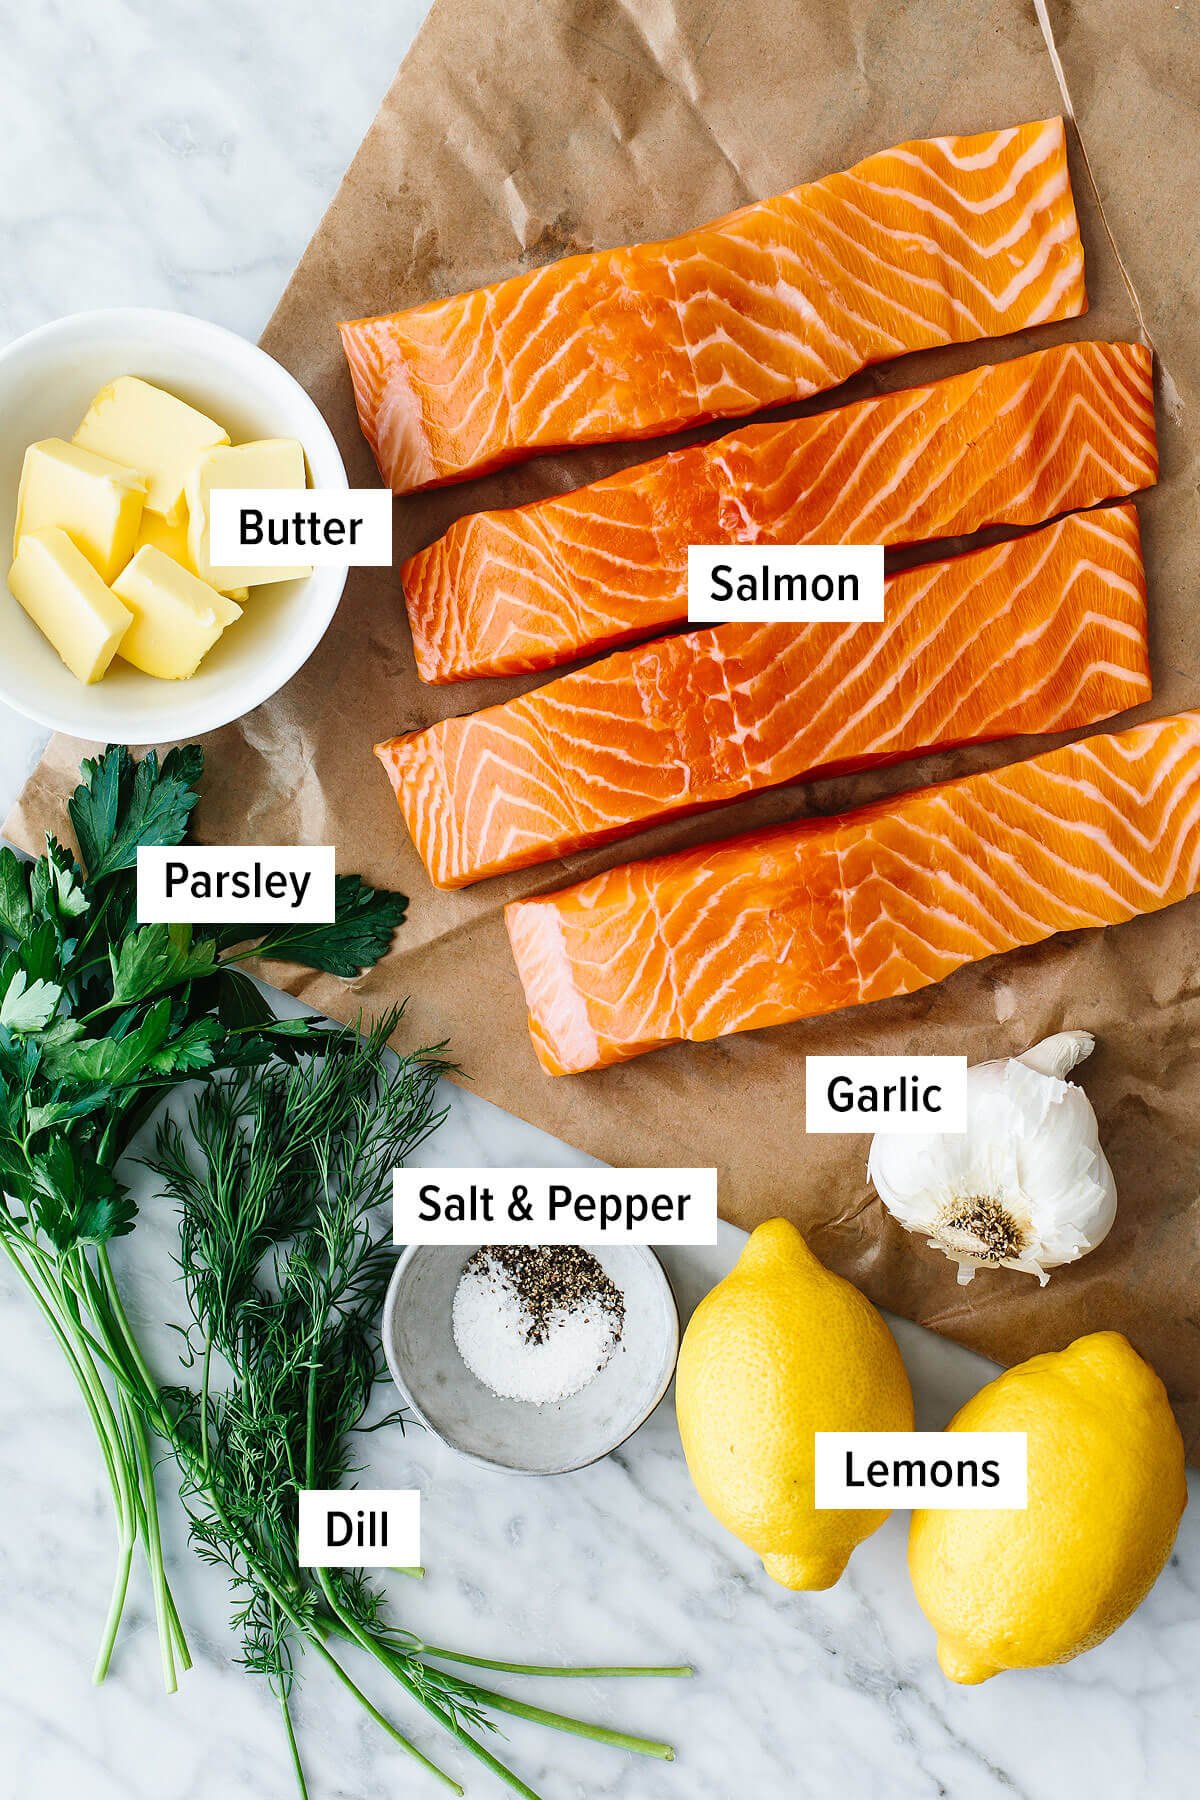 Ingredients for baked salmon.